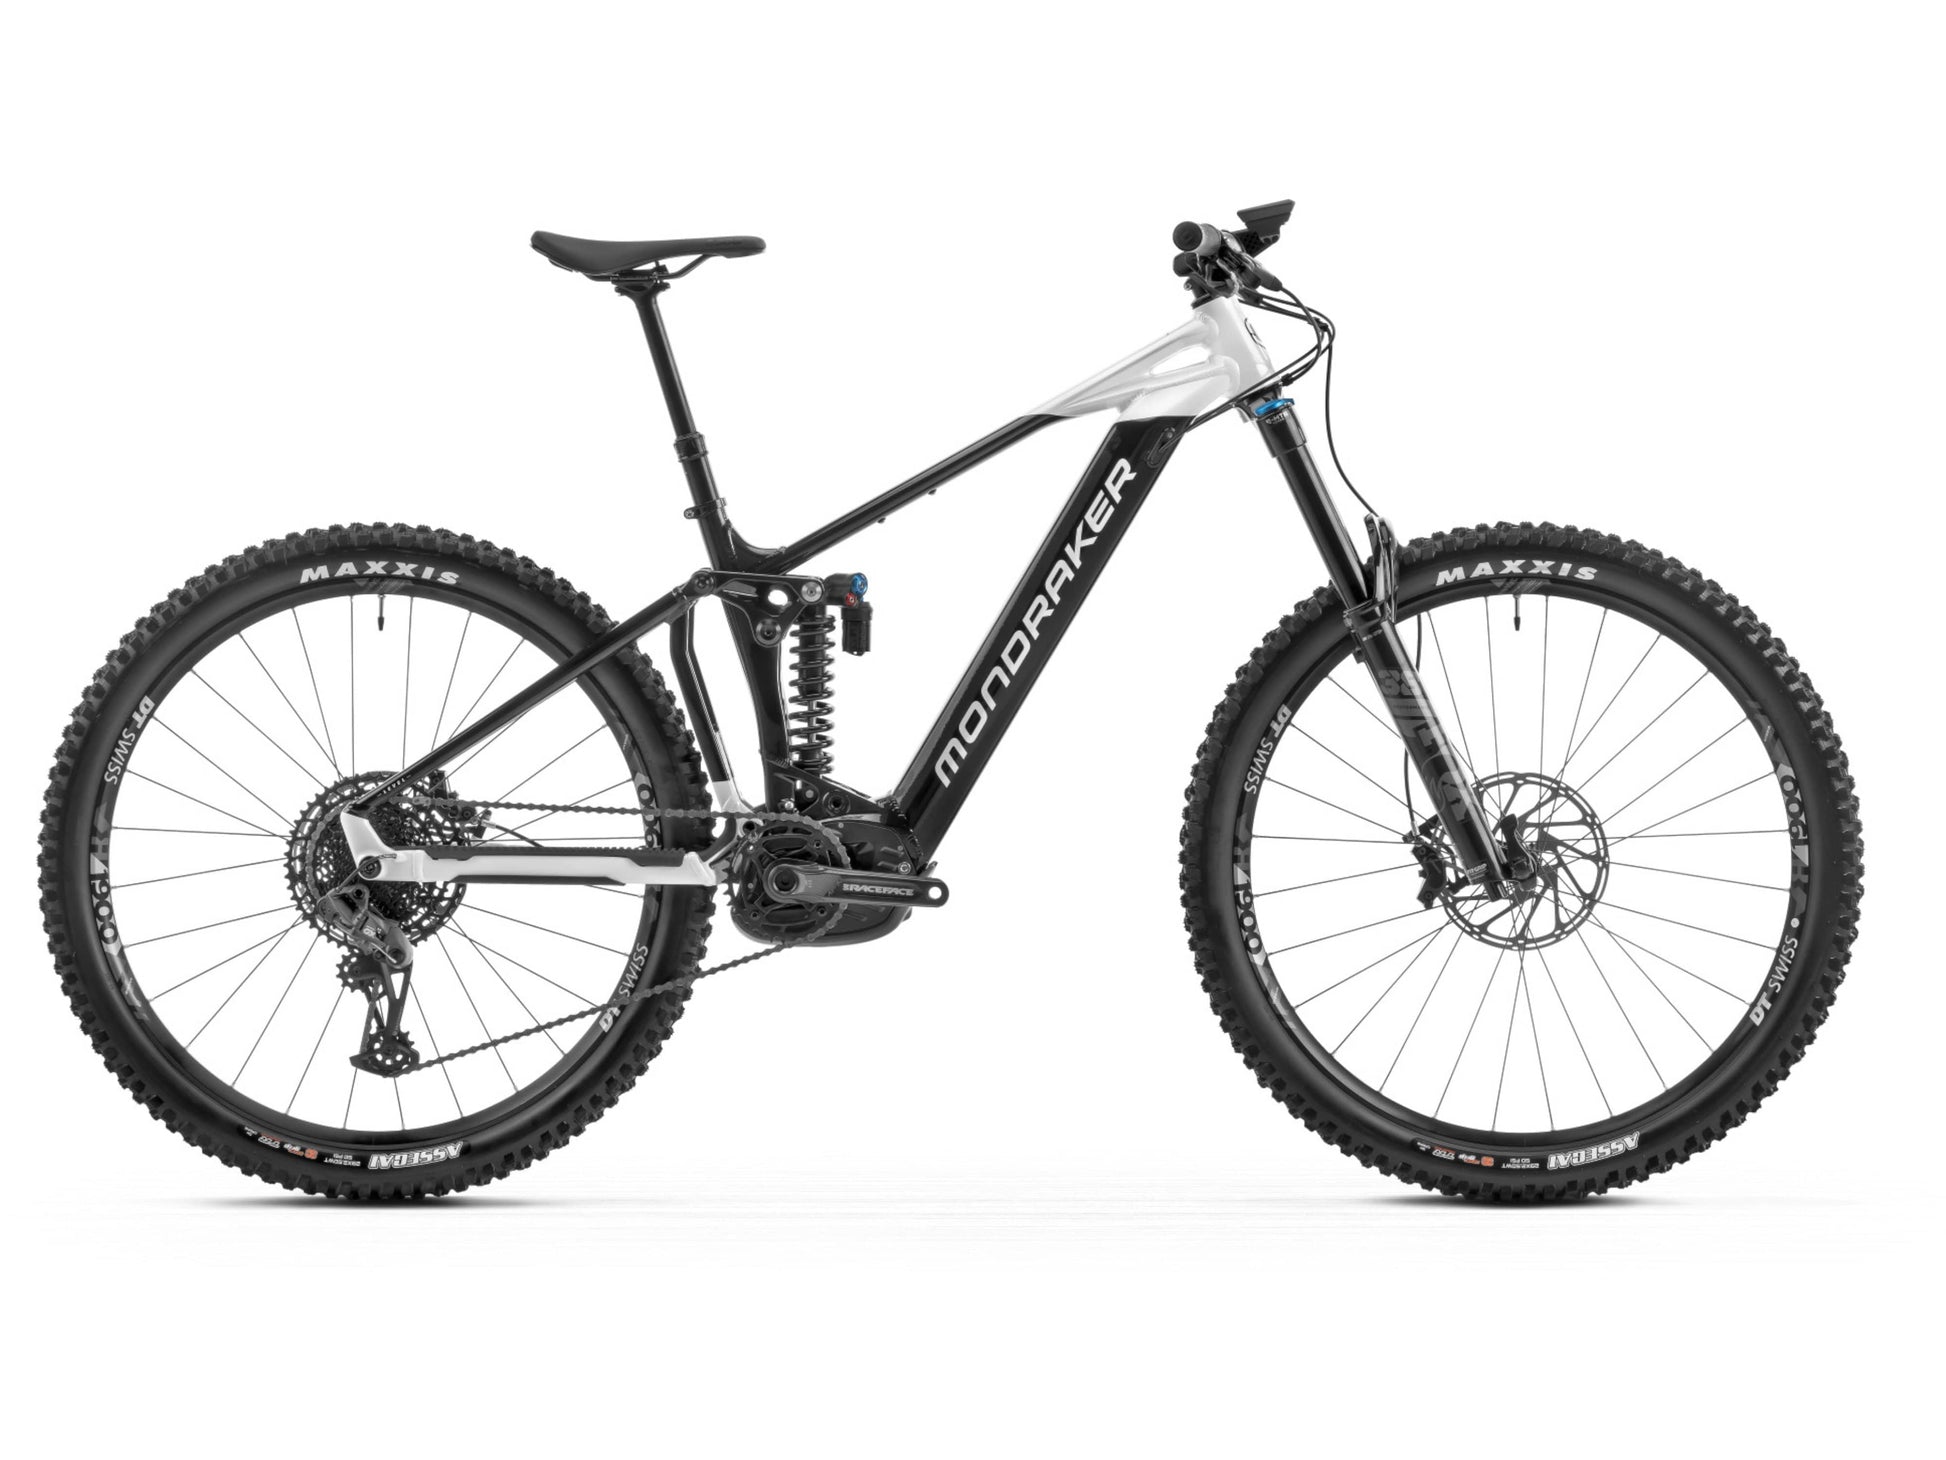 Mondraker Level R electric mountain bike black and dirty white profile on white background on Fly Rides